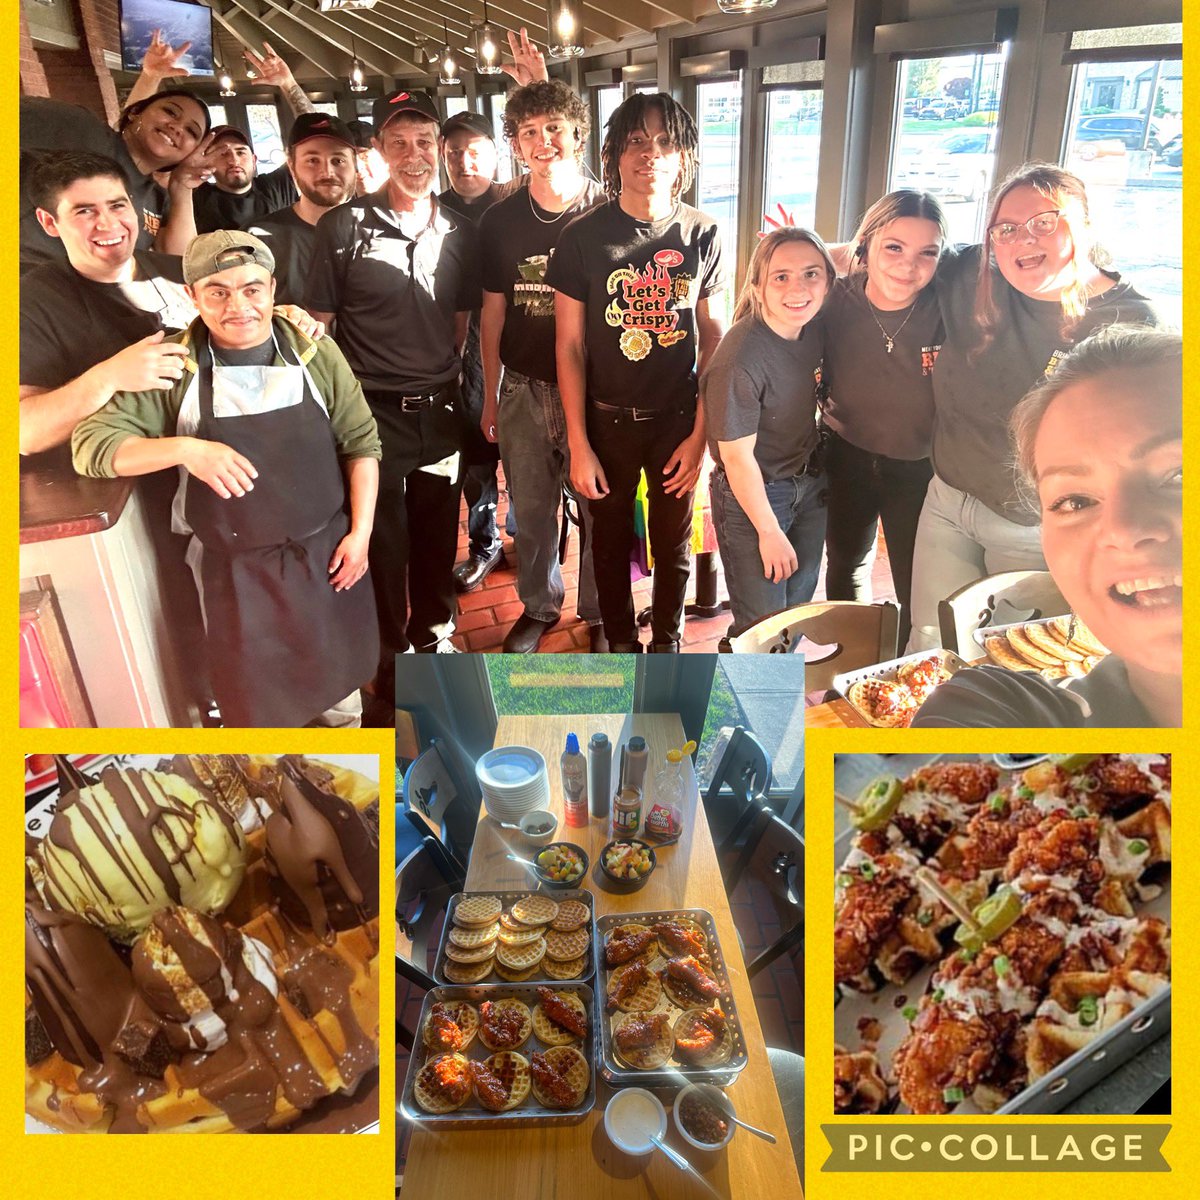 I was unaware #NationalWaffleDay was going to have such a turnout at #chilis1749 But when I said we were making HC Crispers & Waffles they all came running. Then we made IceCream & Waffle Sundaes… #ChilisCULTURE #ChilisLOVE @isalin123456 @ethandshaffer @CaraLiebman @chilis